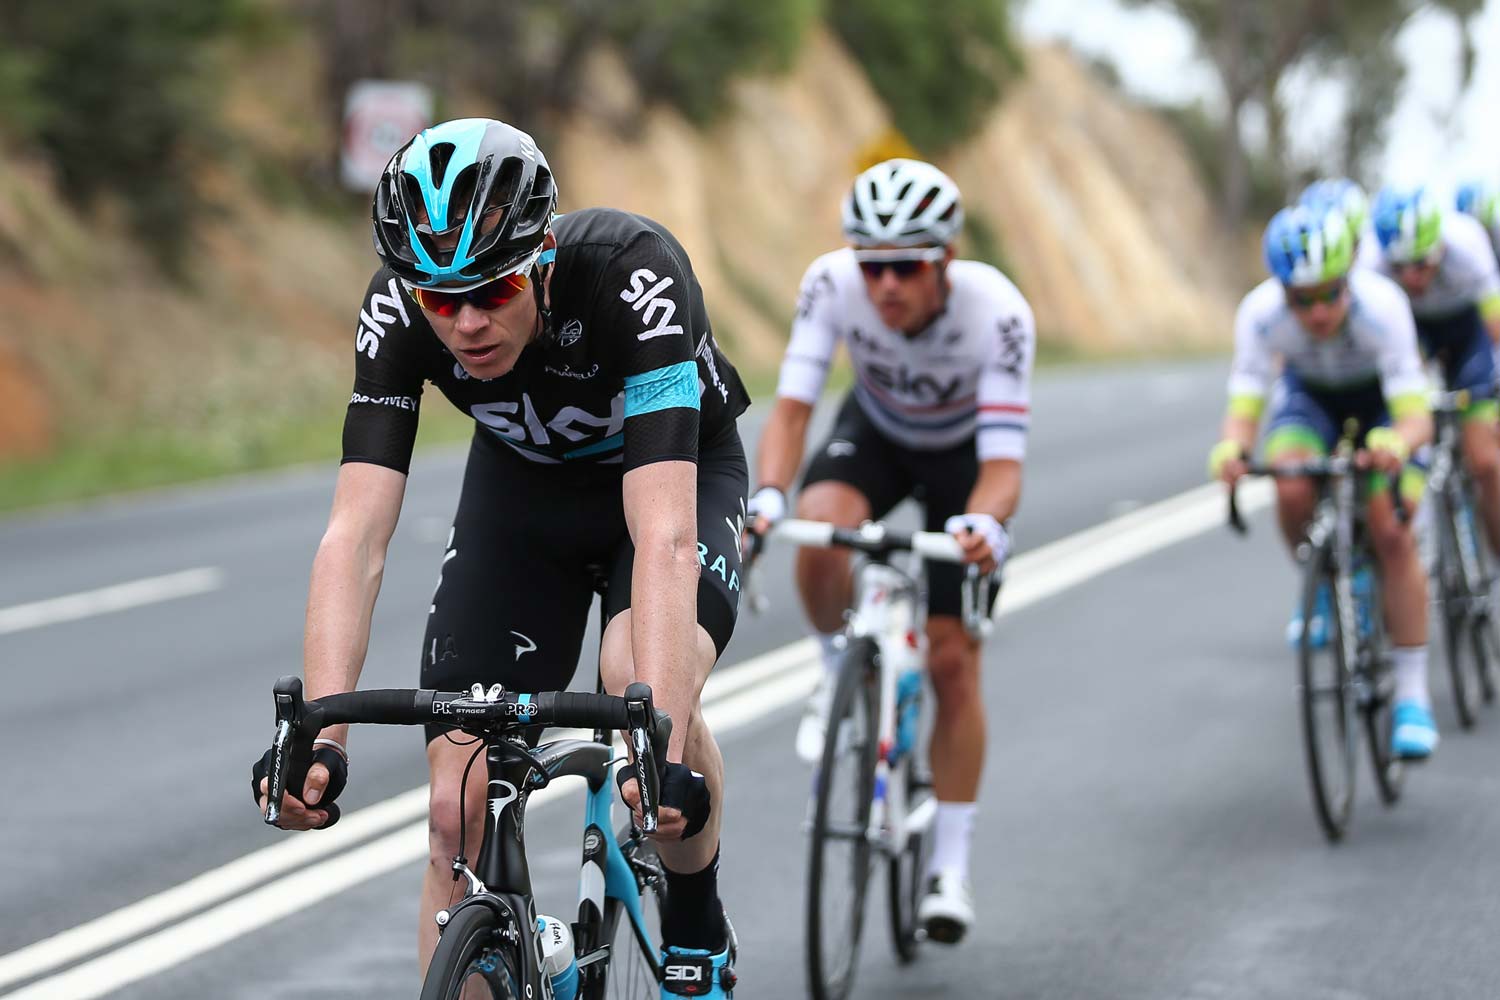 Froome was on the attack early in the 2016 Jayco-Herald Sun Tour. His team-mate Peter Kennaugh took the yellow jersey early in the stage race but Froome claimed the title with a stage win at Arthurs Seat in the final stage. Photo: Con Chronis